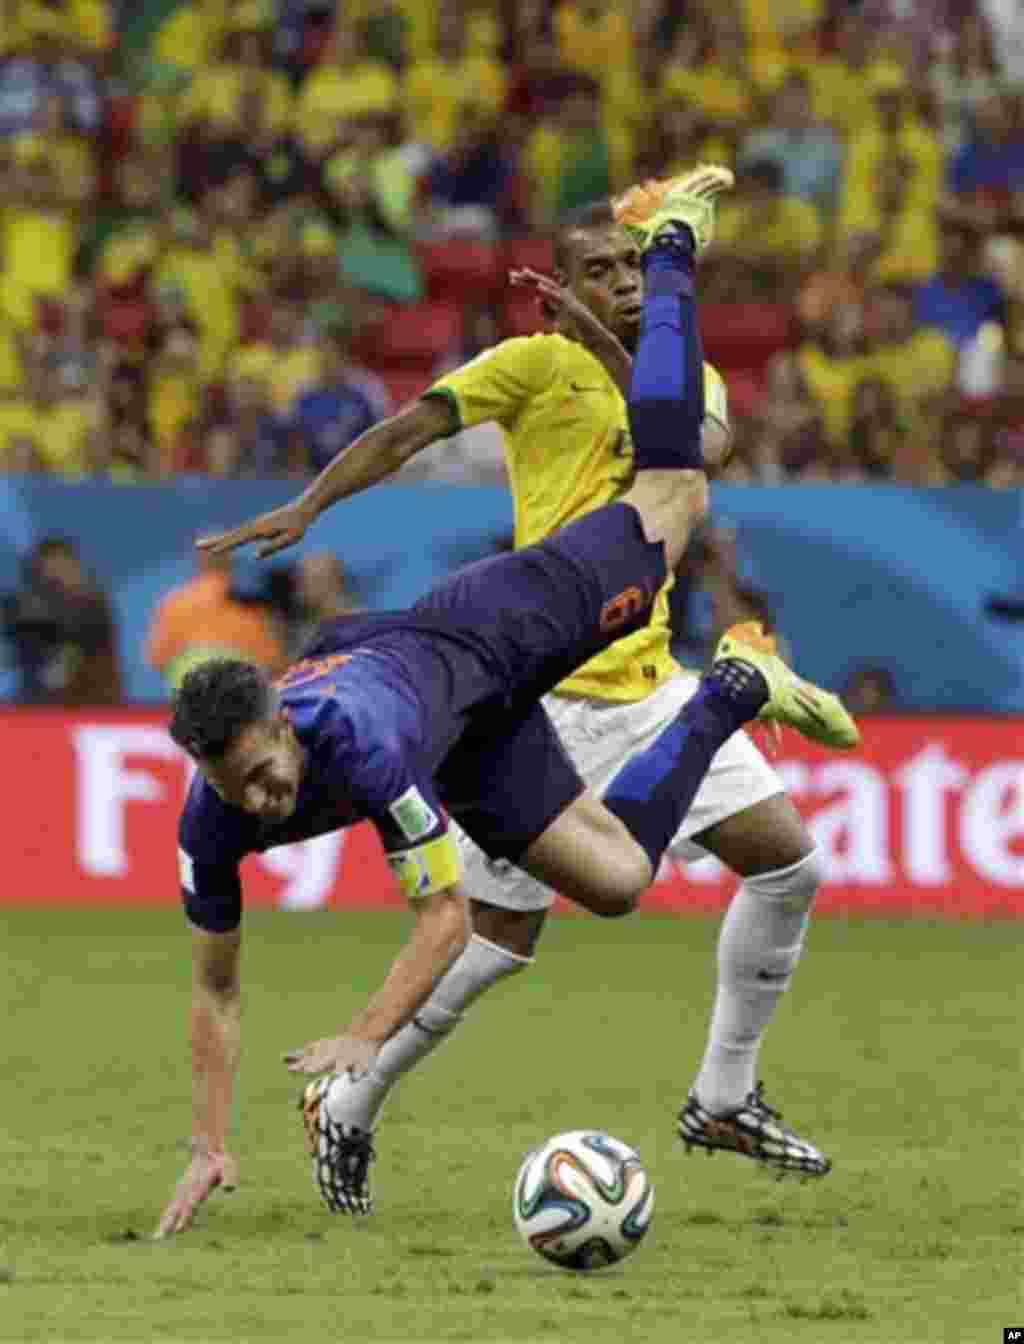 Netherlands' Robin van Persie is fouled by Brazil's Fernandinho during the World Cup third-place soccer match between Brazil and the Netherlands at the Estadio Nacional in Brasilia, Brazil, Saturday, July 12, 2014. (AP Photo/Hassan Ammar)